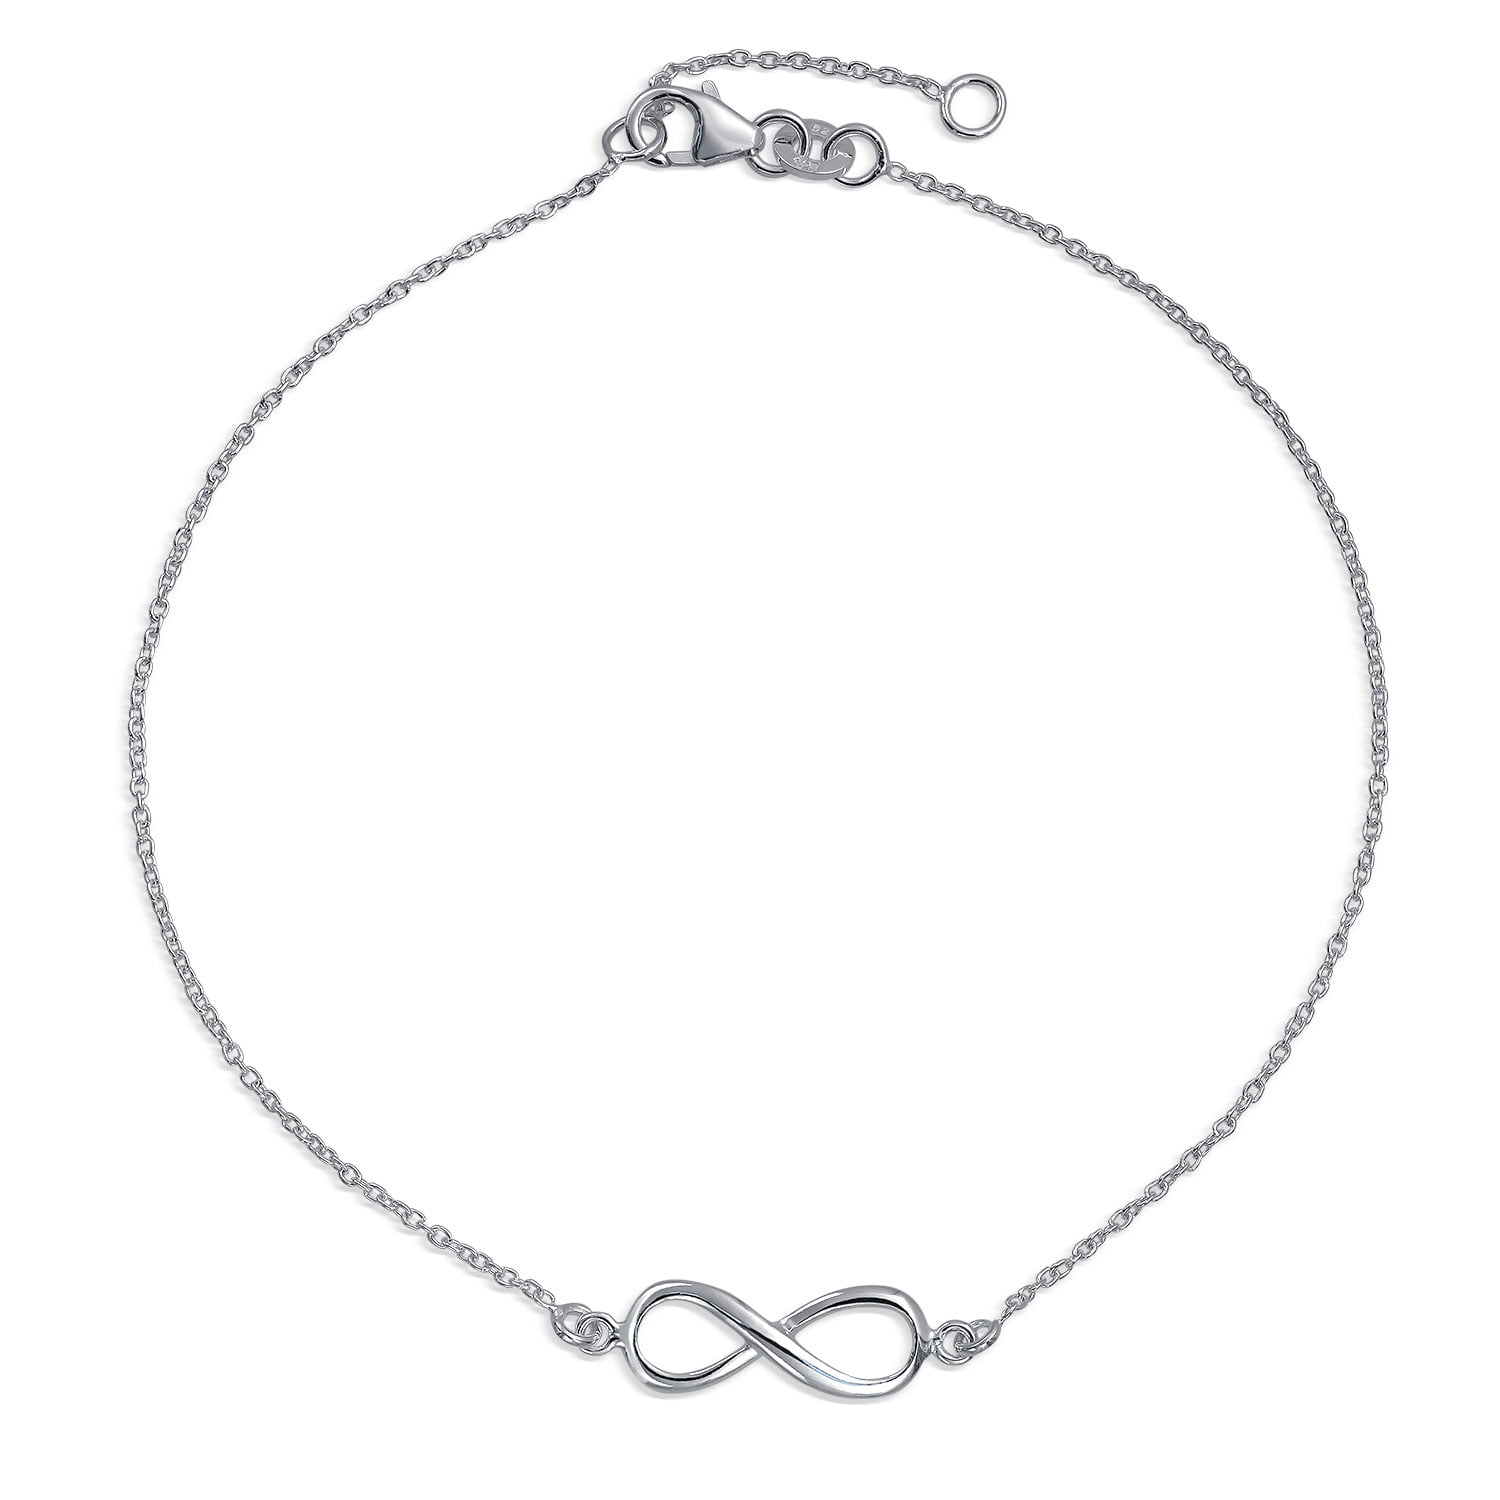 Figure 8 Necklace Pendant .925 Sterling Silver Women's Jewelry Infinity Charm